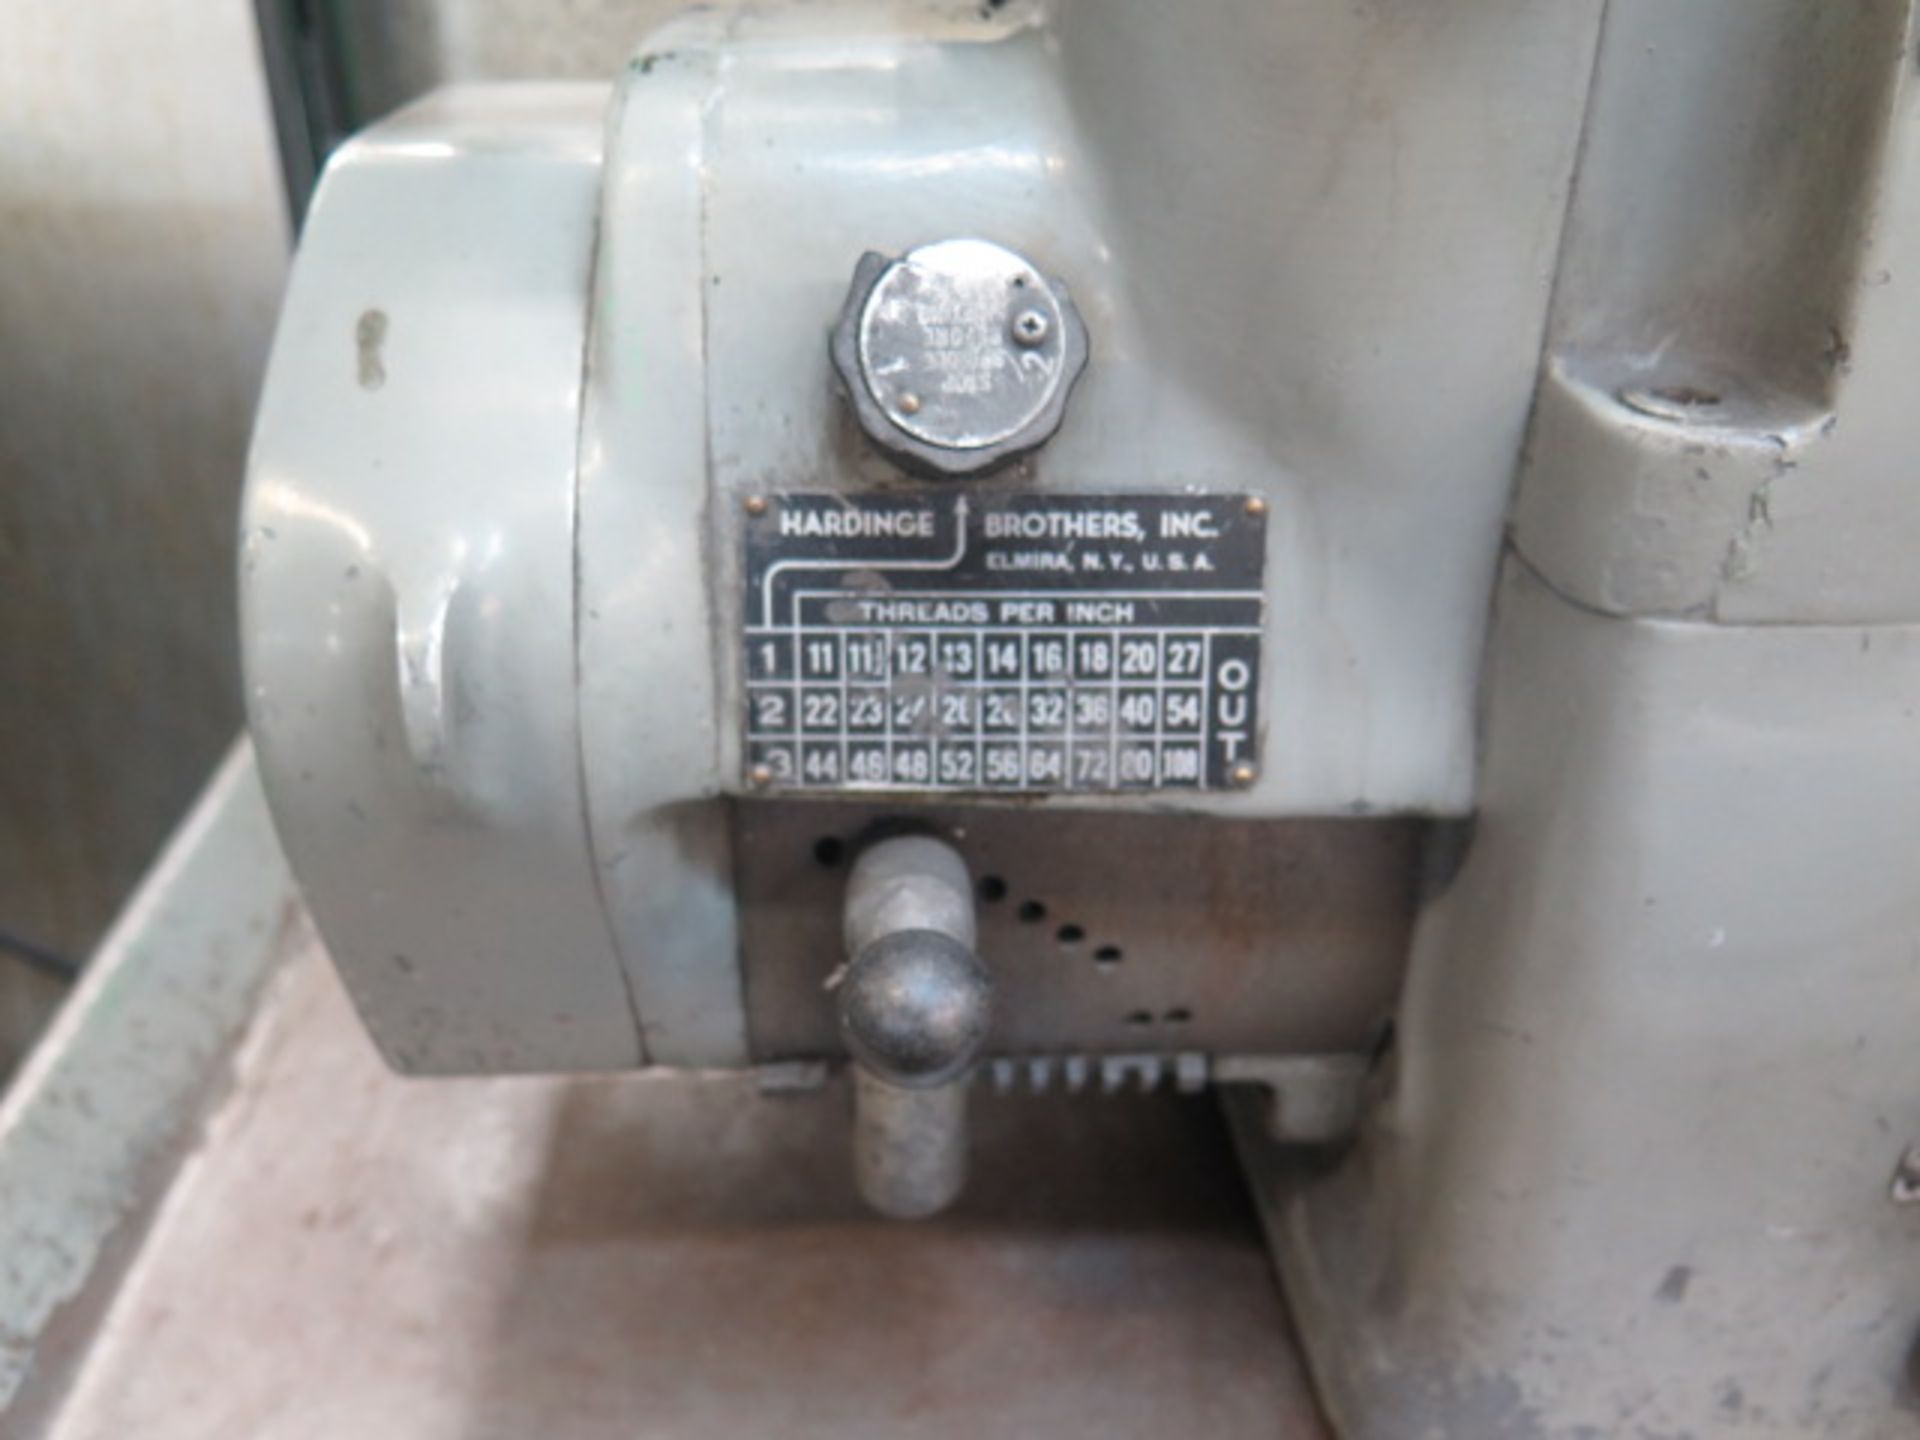 Hardinge HLV-H Wide Bed Tool Room Lathe s/n HLV-H-3211 w/ 125-3000 RPM, Inch Threading, SOLD AS IS - Image 7 of 13